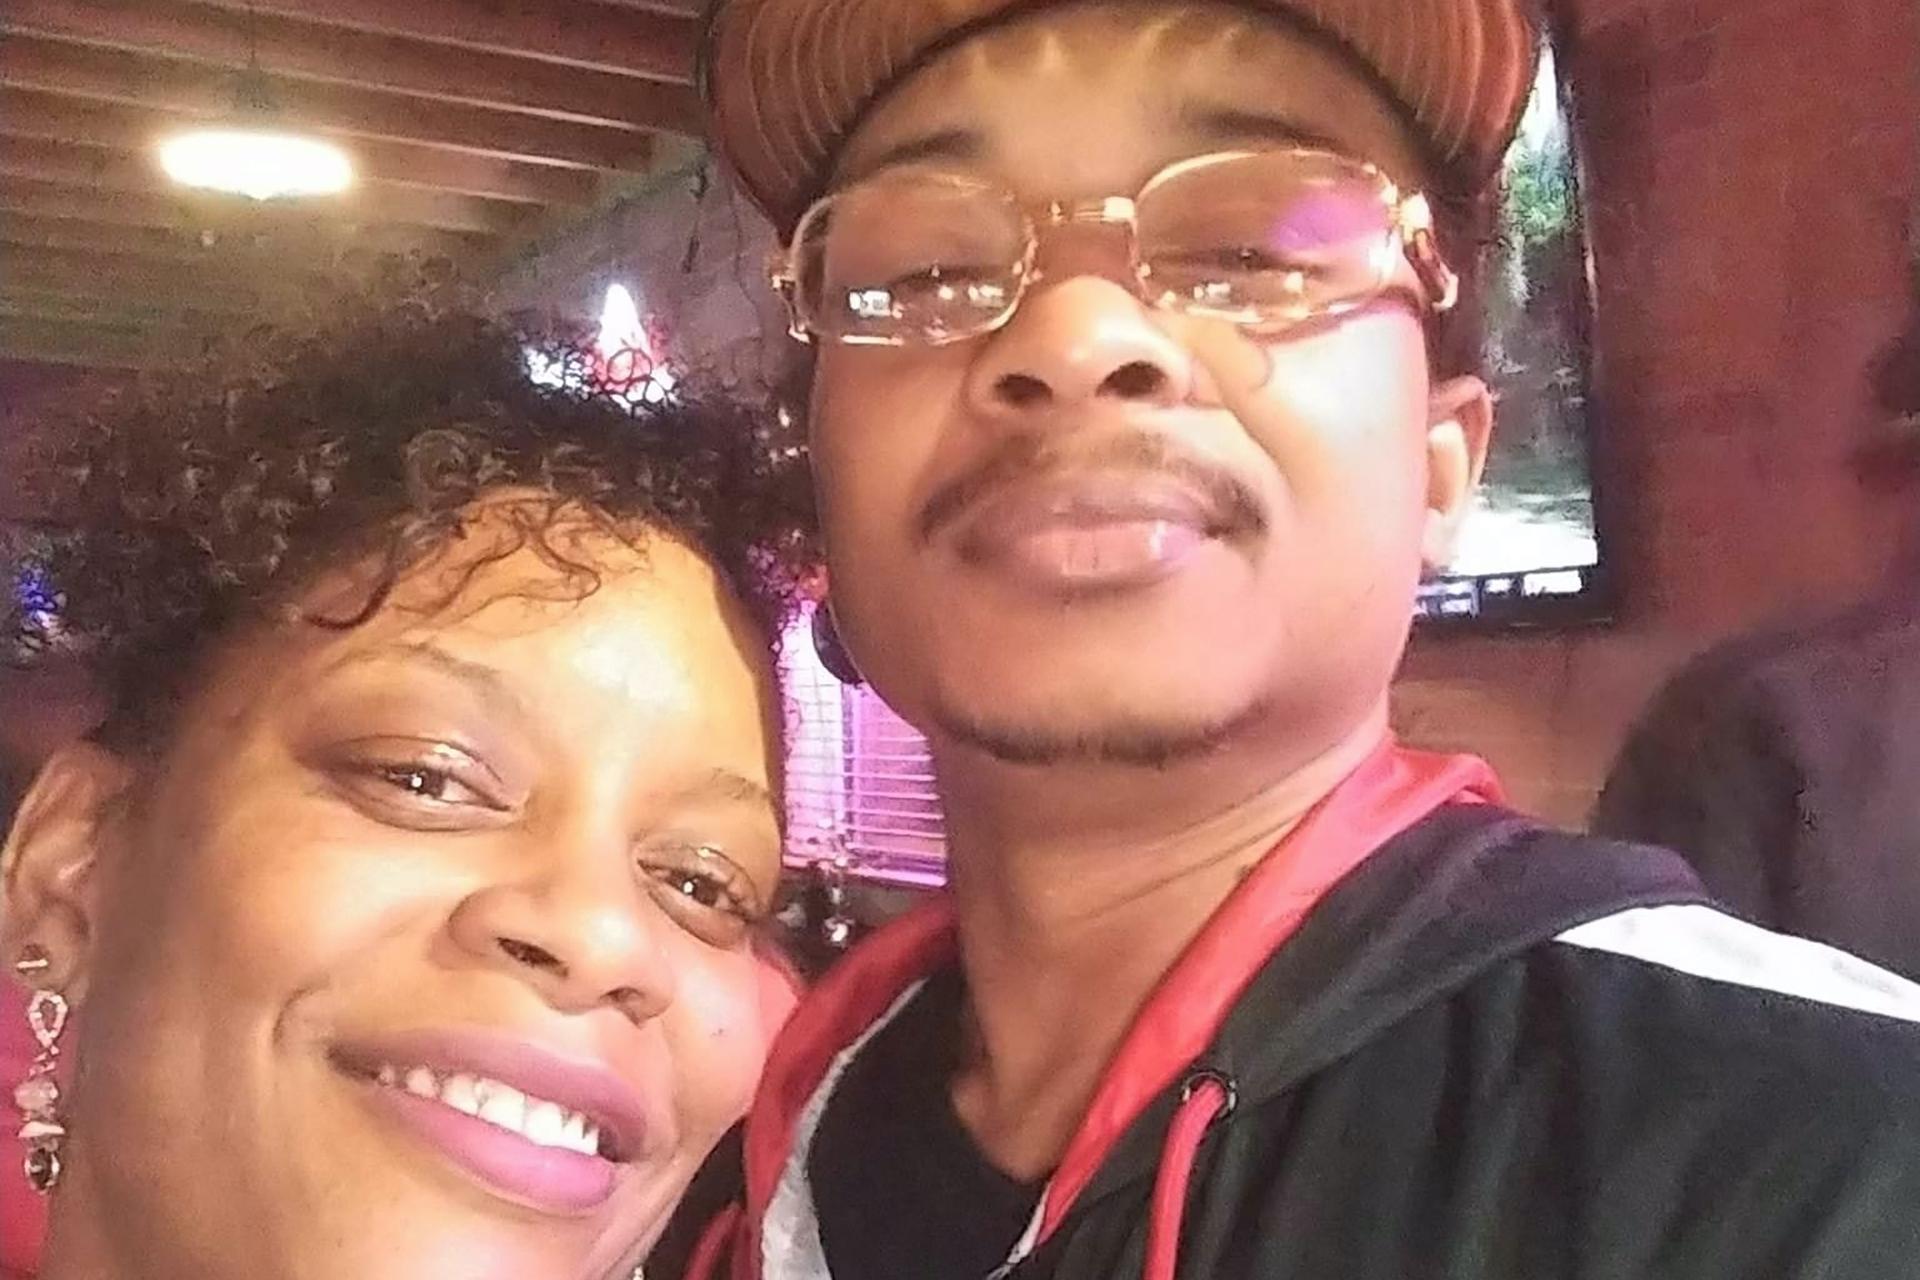 In this September 2019 file photo taken in Evanston, Ill., and provided by Adria-Joi Watkins, Watkins, left, poses in a selfie with her second cousin Jacob Blake. (Adria-Joi Watkins via AP, File)